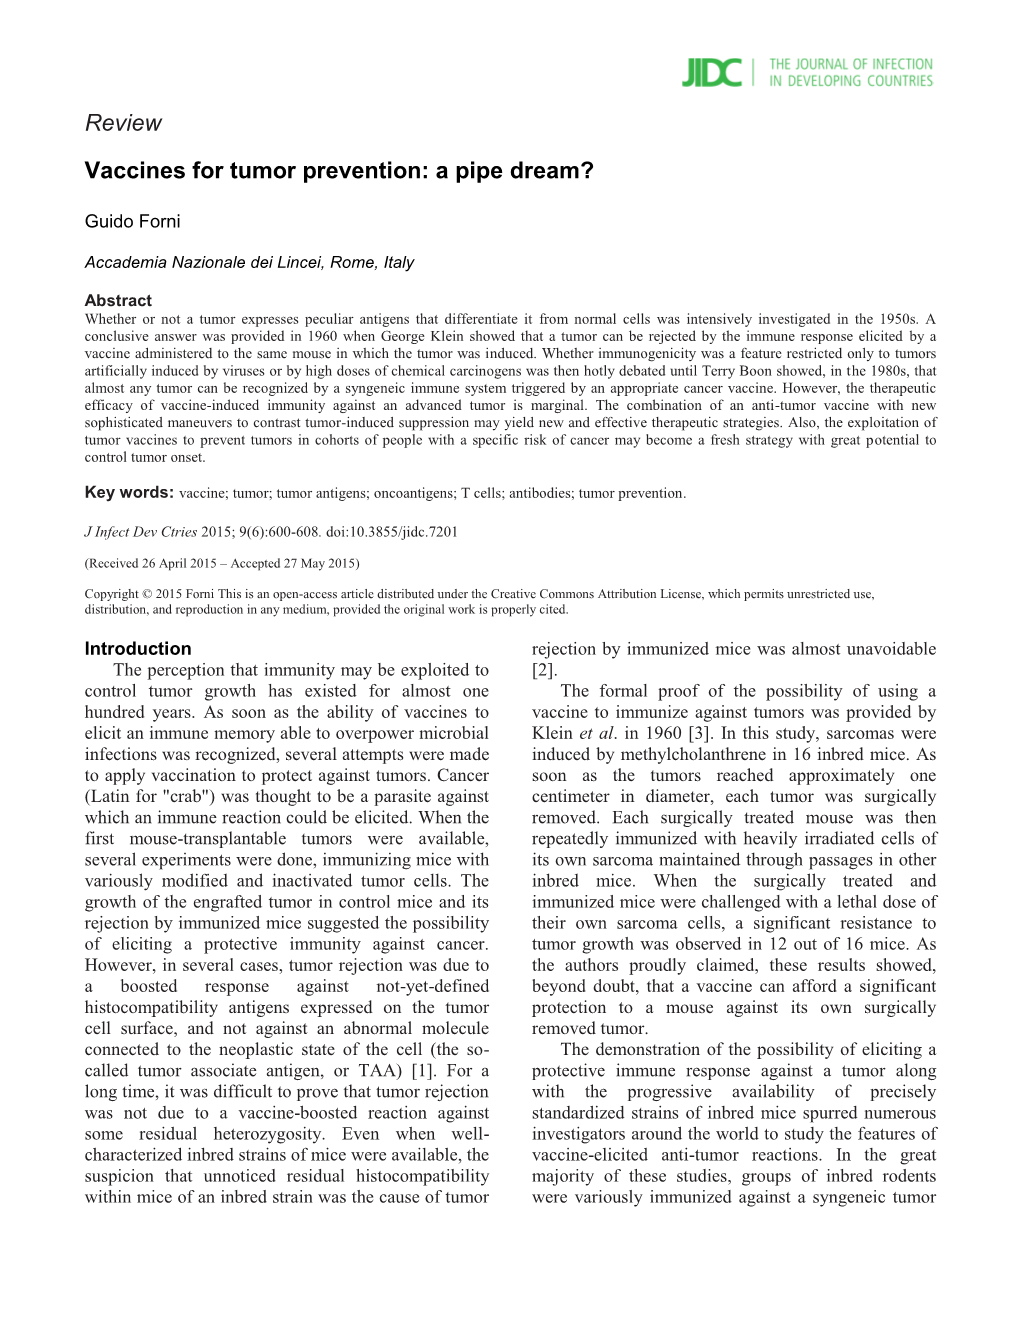 Review Vaccines for Tumor Prevention: a Pipe Dream?